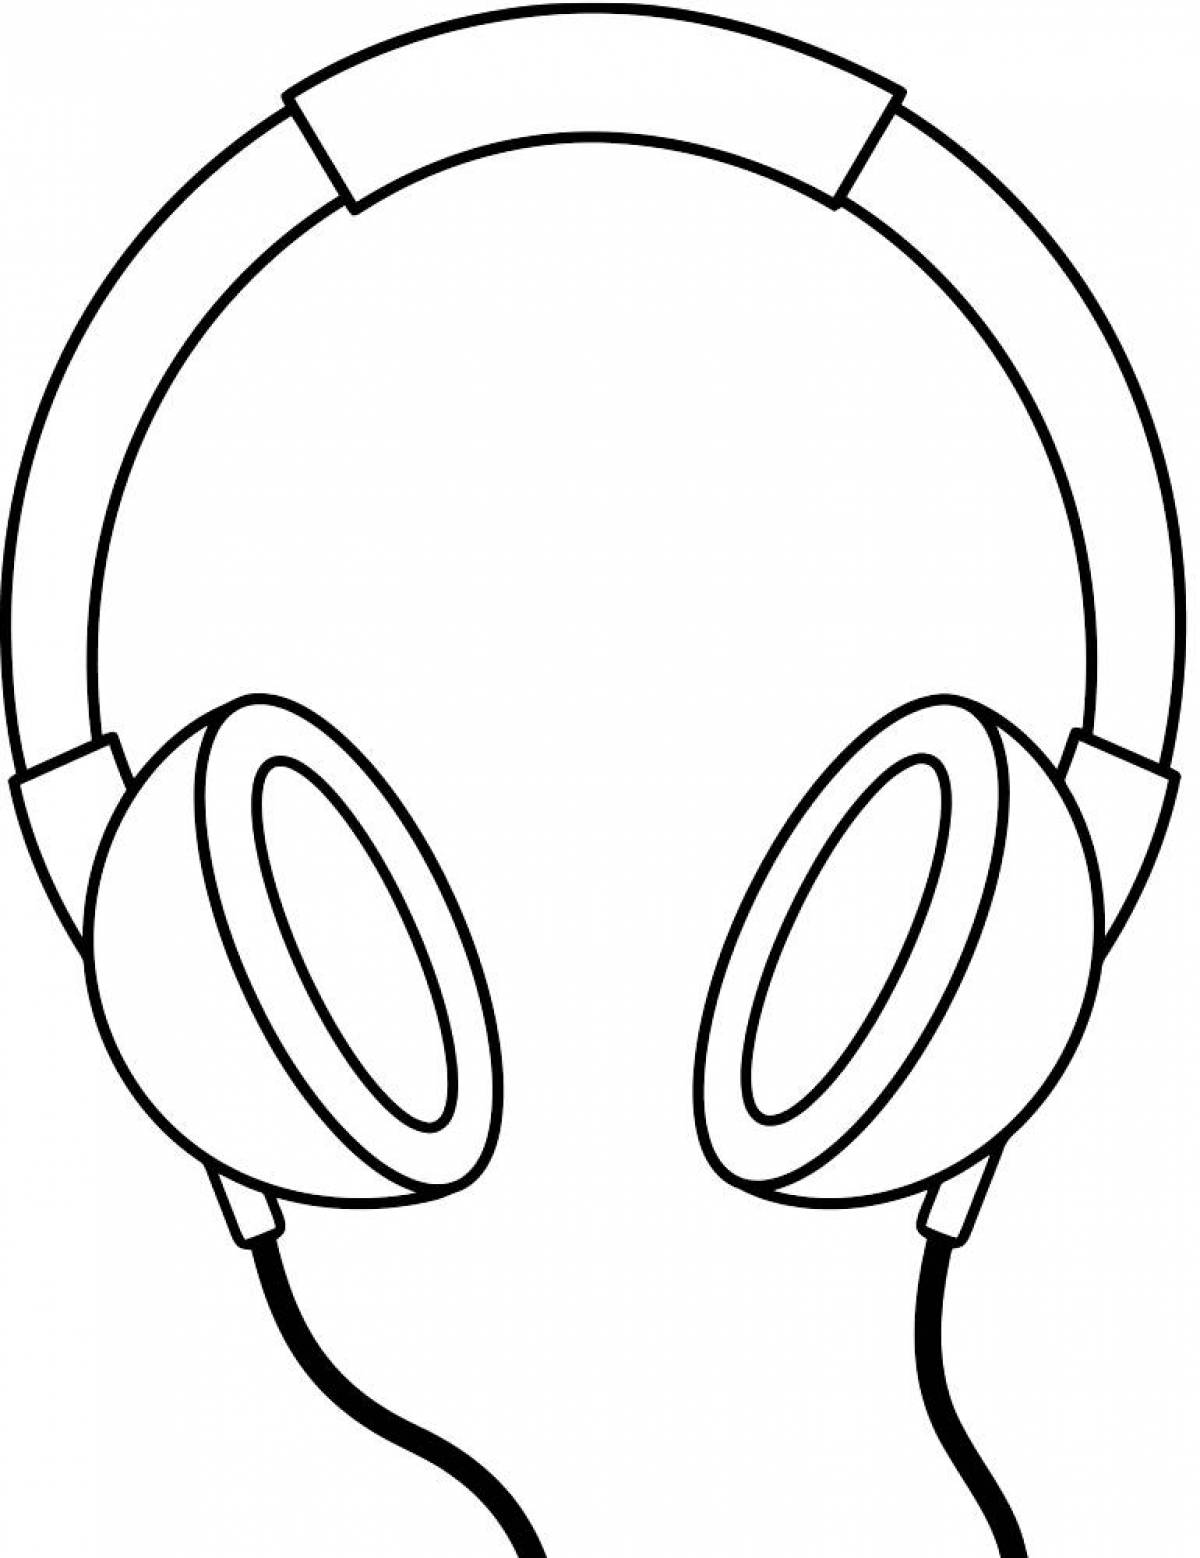 Creative headphone coloring page